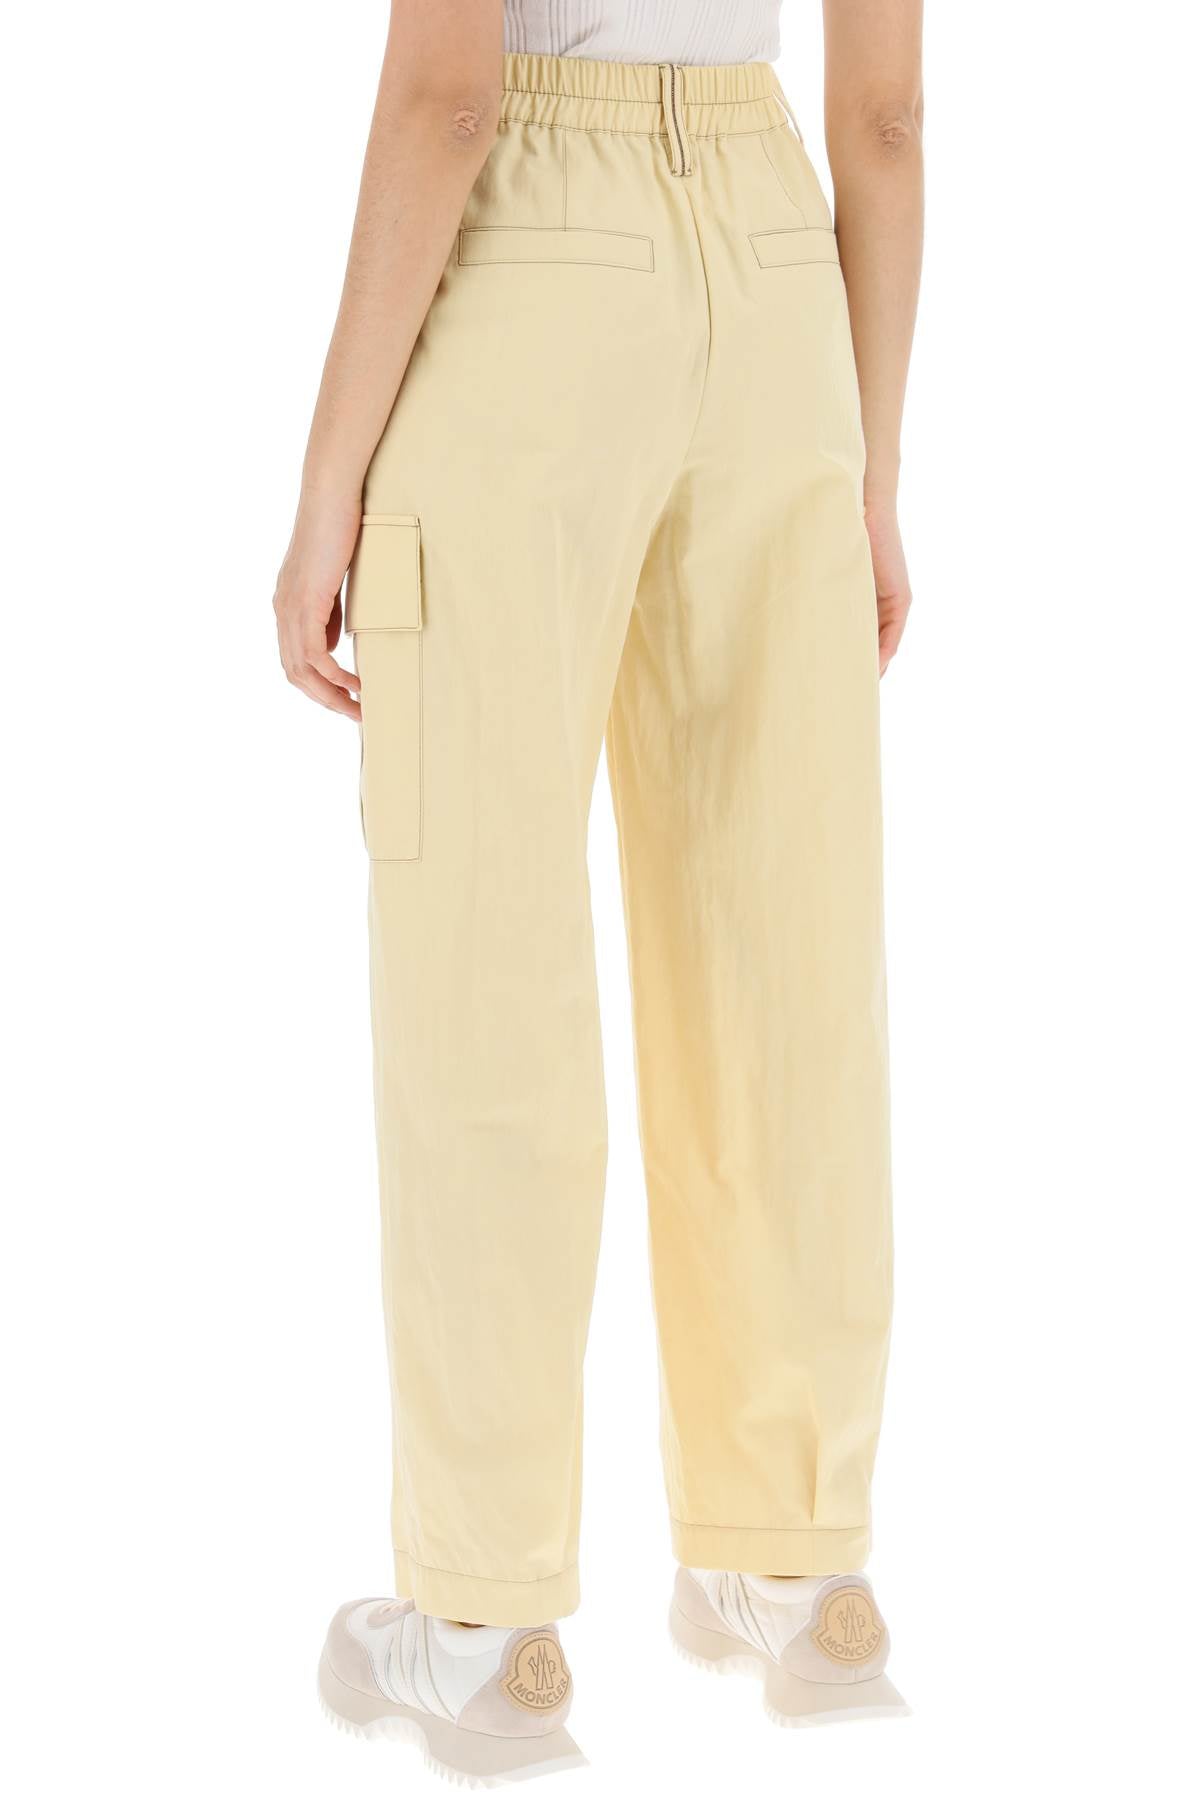 Shop Brunello Cucinelli Yellow Utility Pants With Pockets For Women